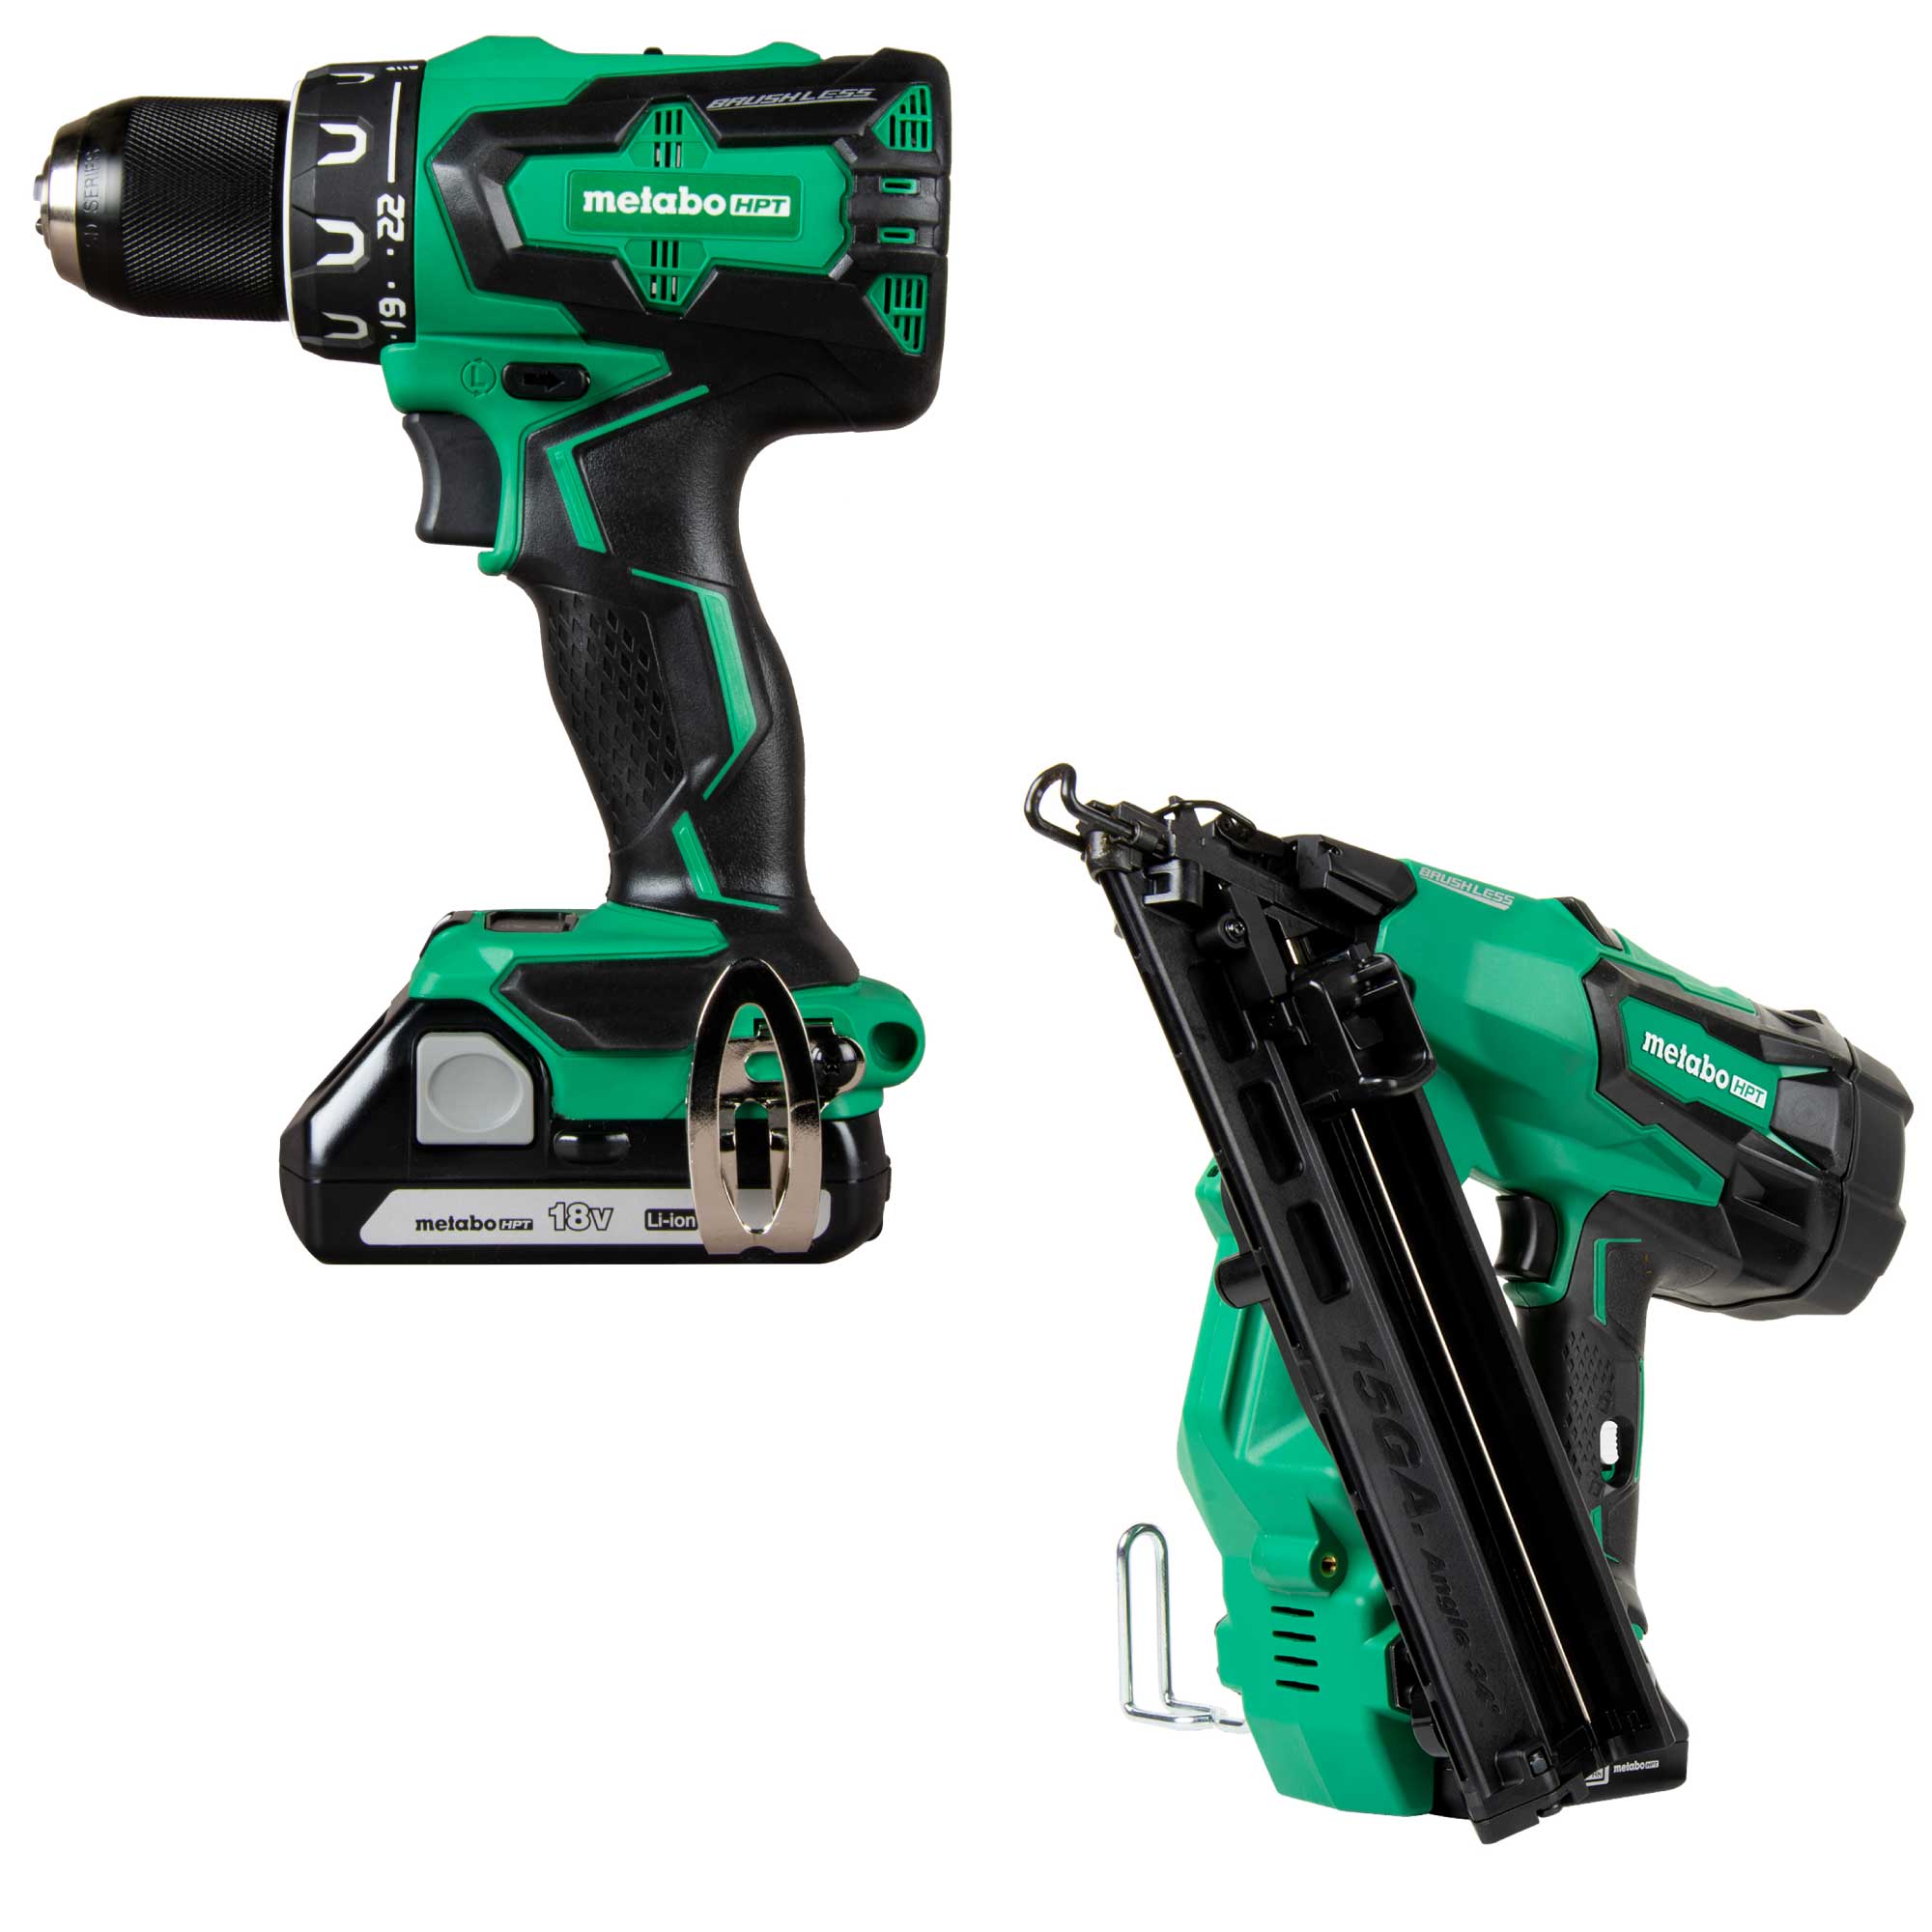 Metabo HPT MultiVolt 18-Volt 1/2-in Brushless Cordless Drill (2-batteries included and charger included) with MultiVolt 18-Volt 15-Gauge Cordless